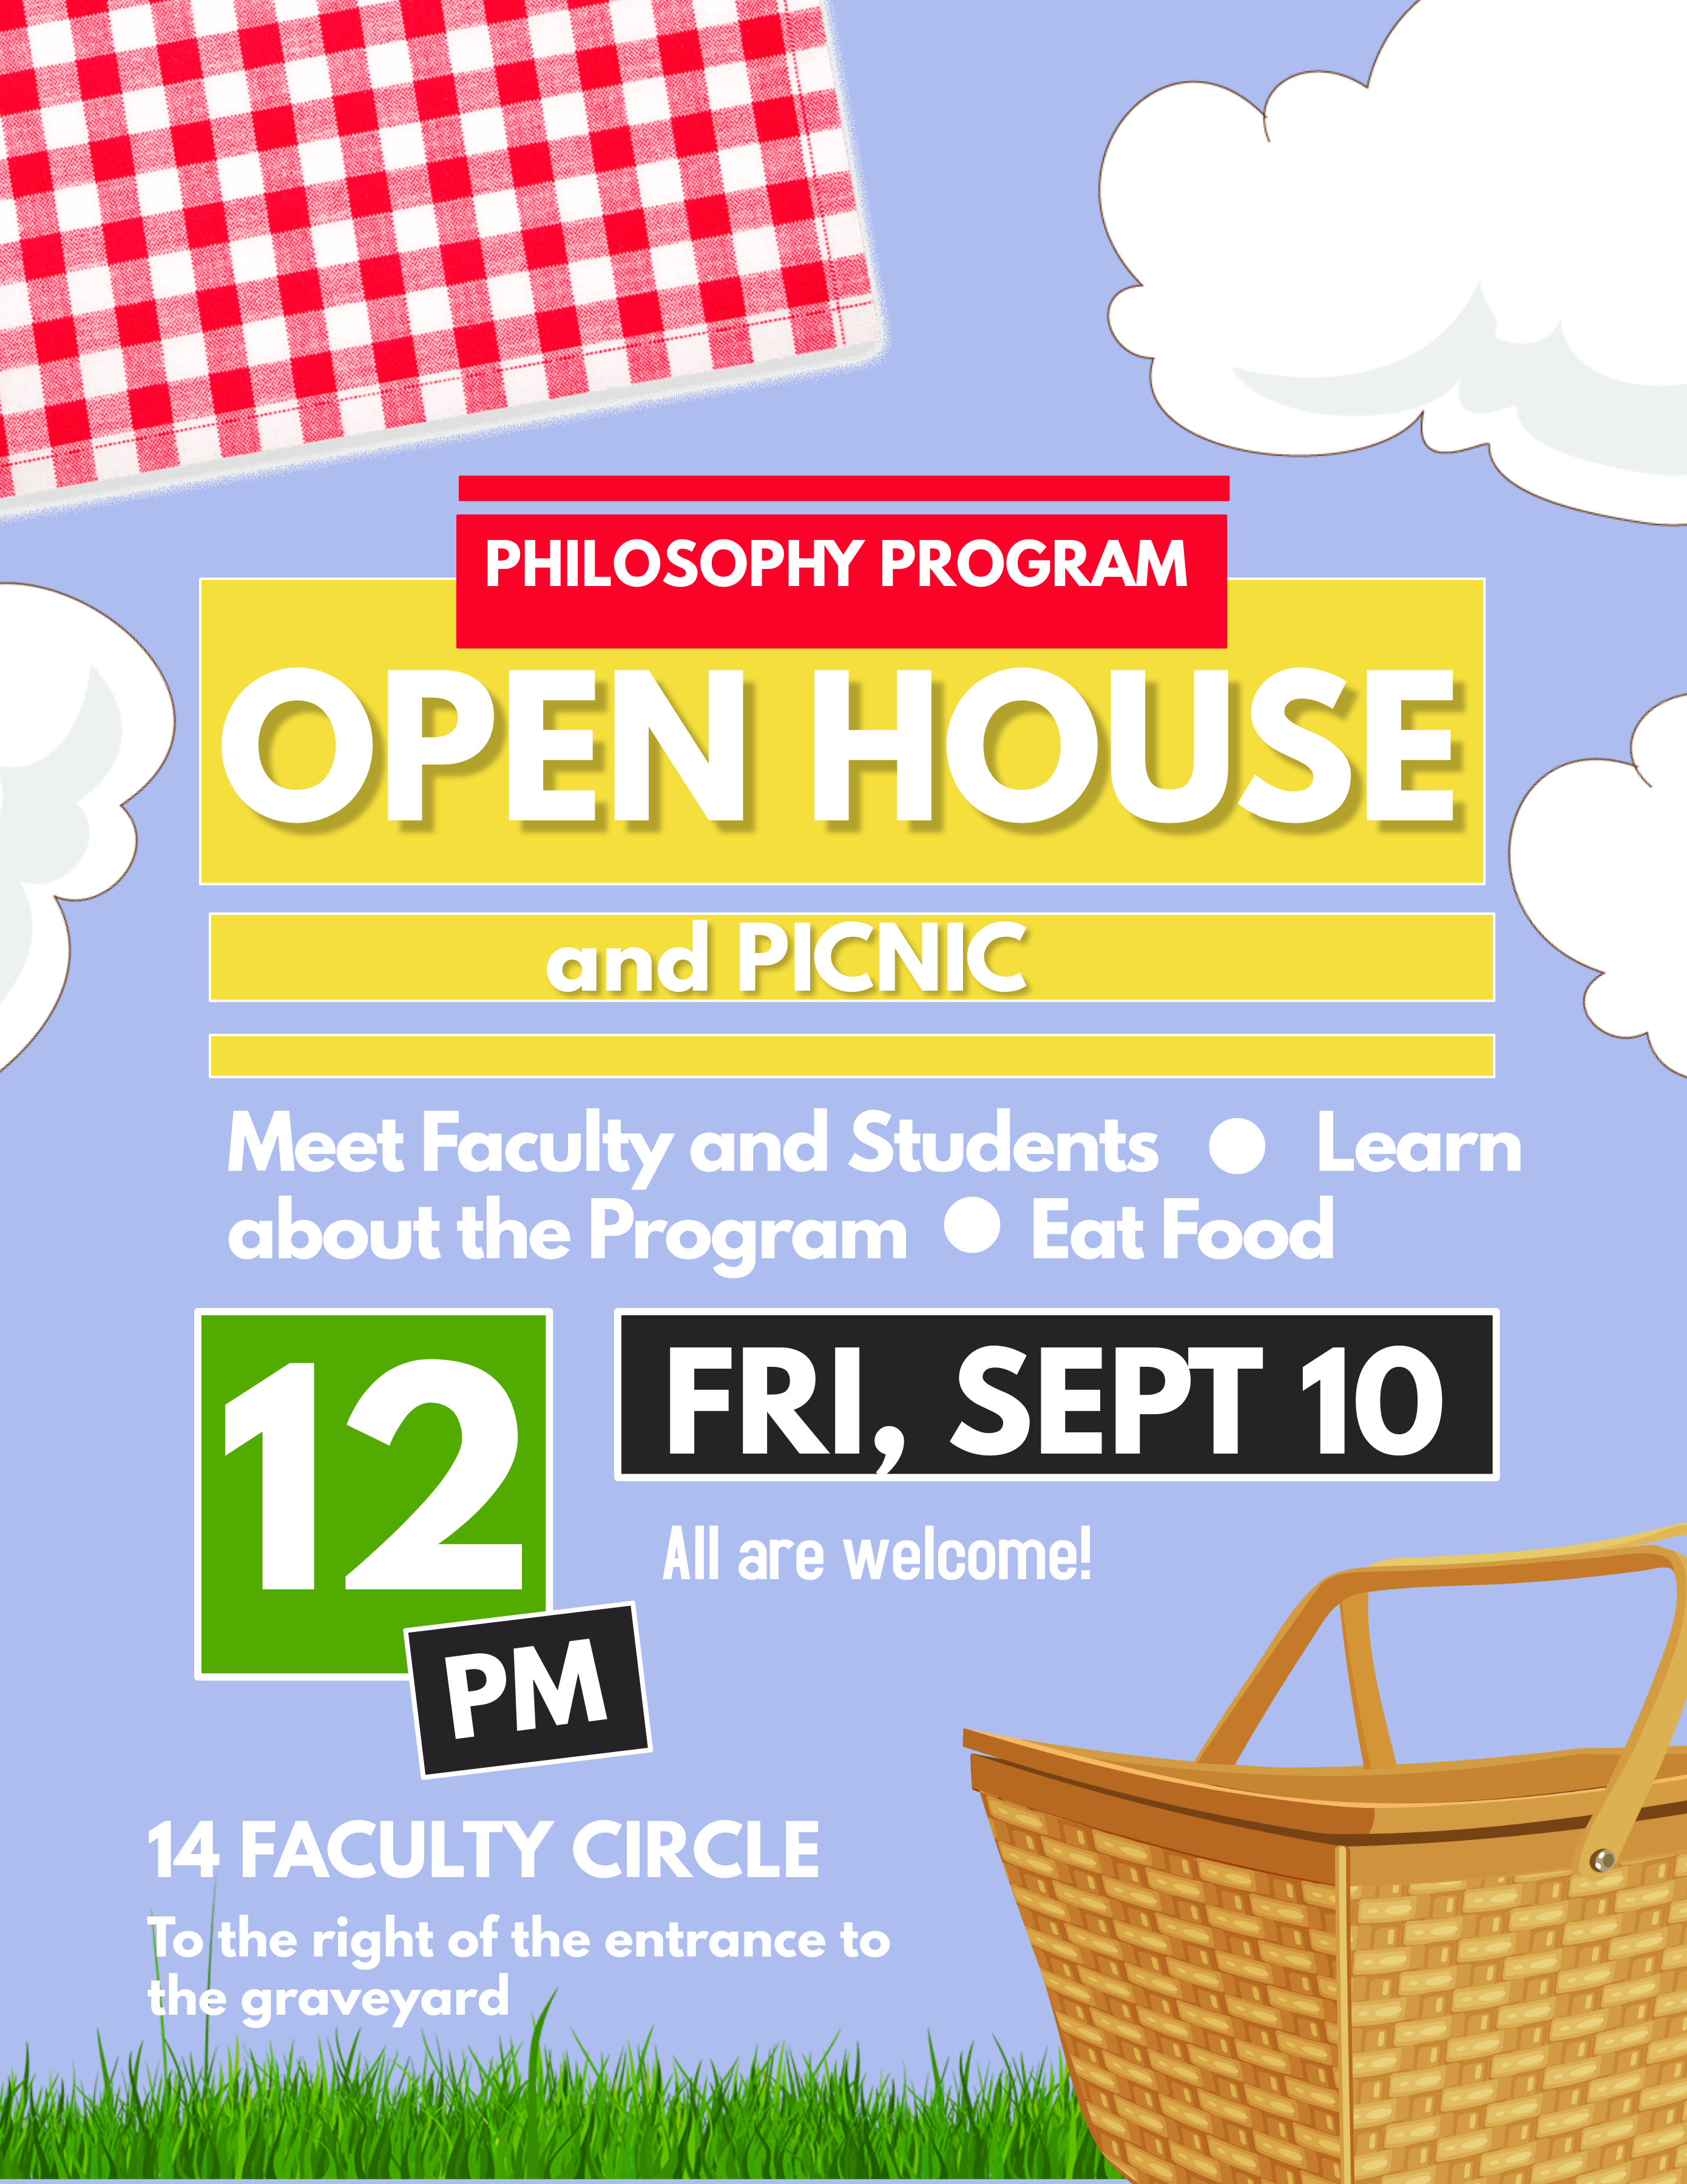 Philosophy Program Open House and Picnic